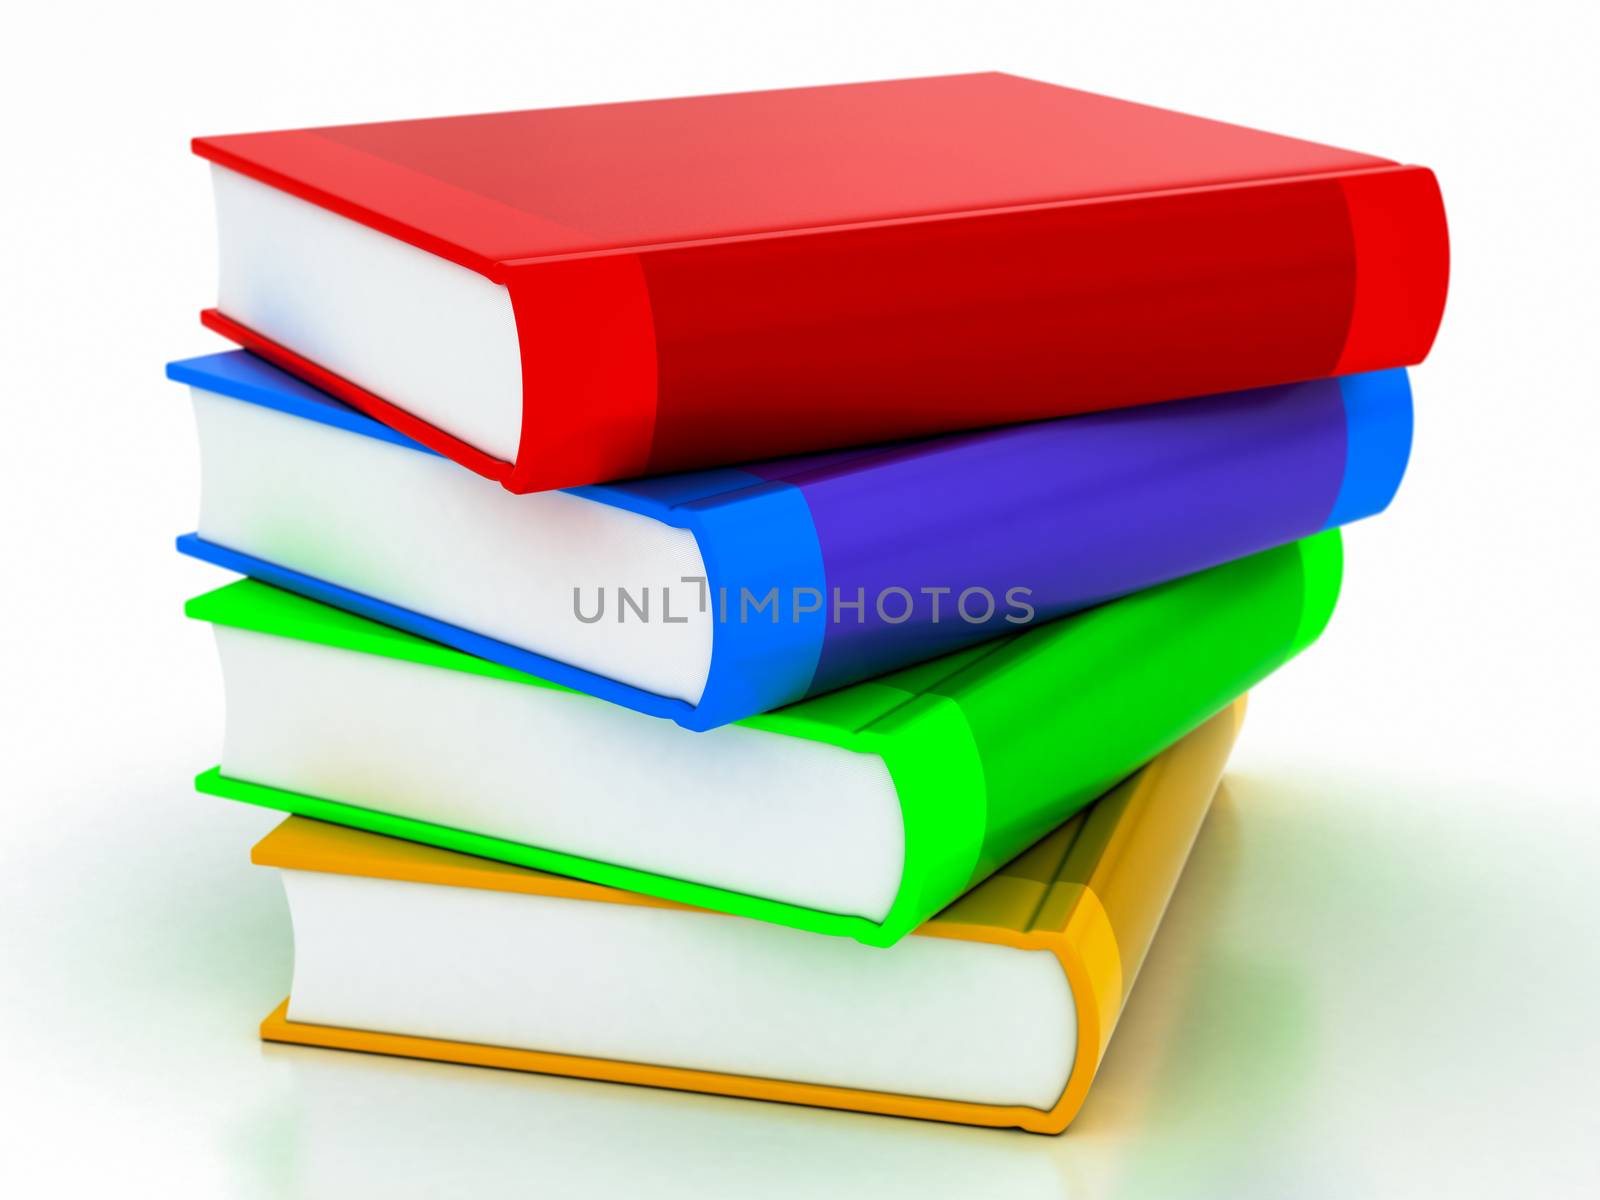 multi-colored books by Lupen